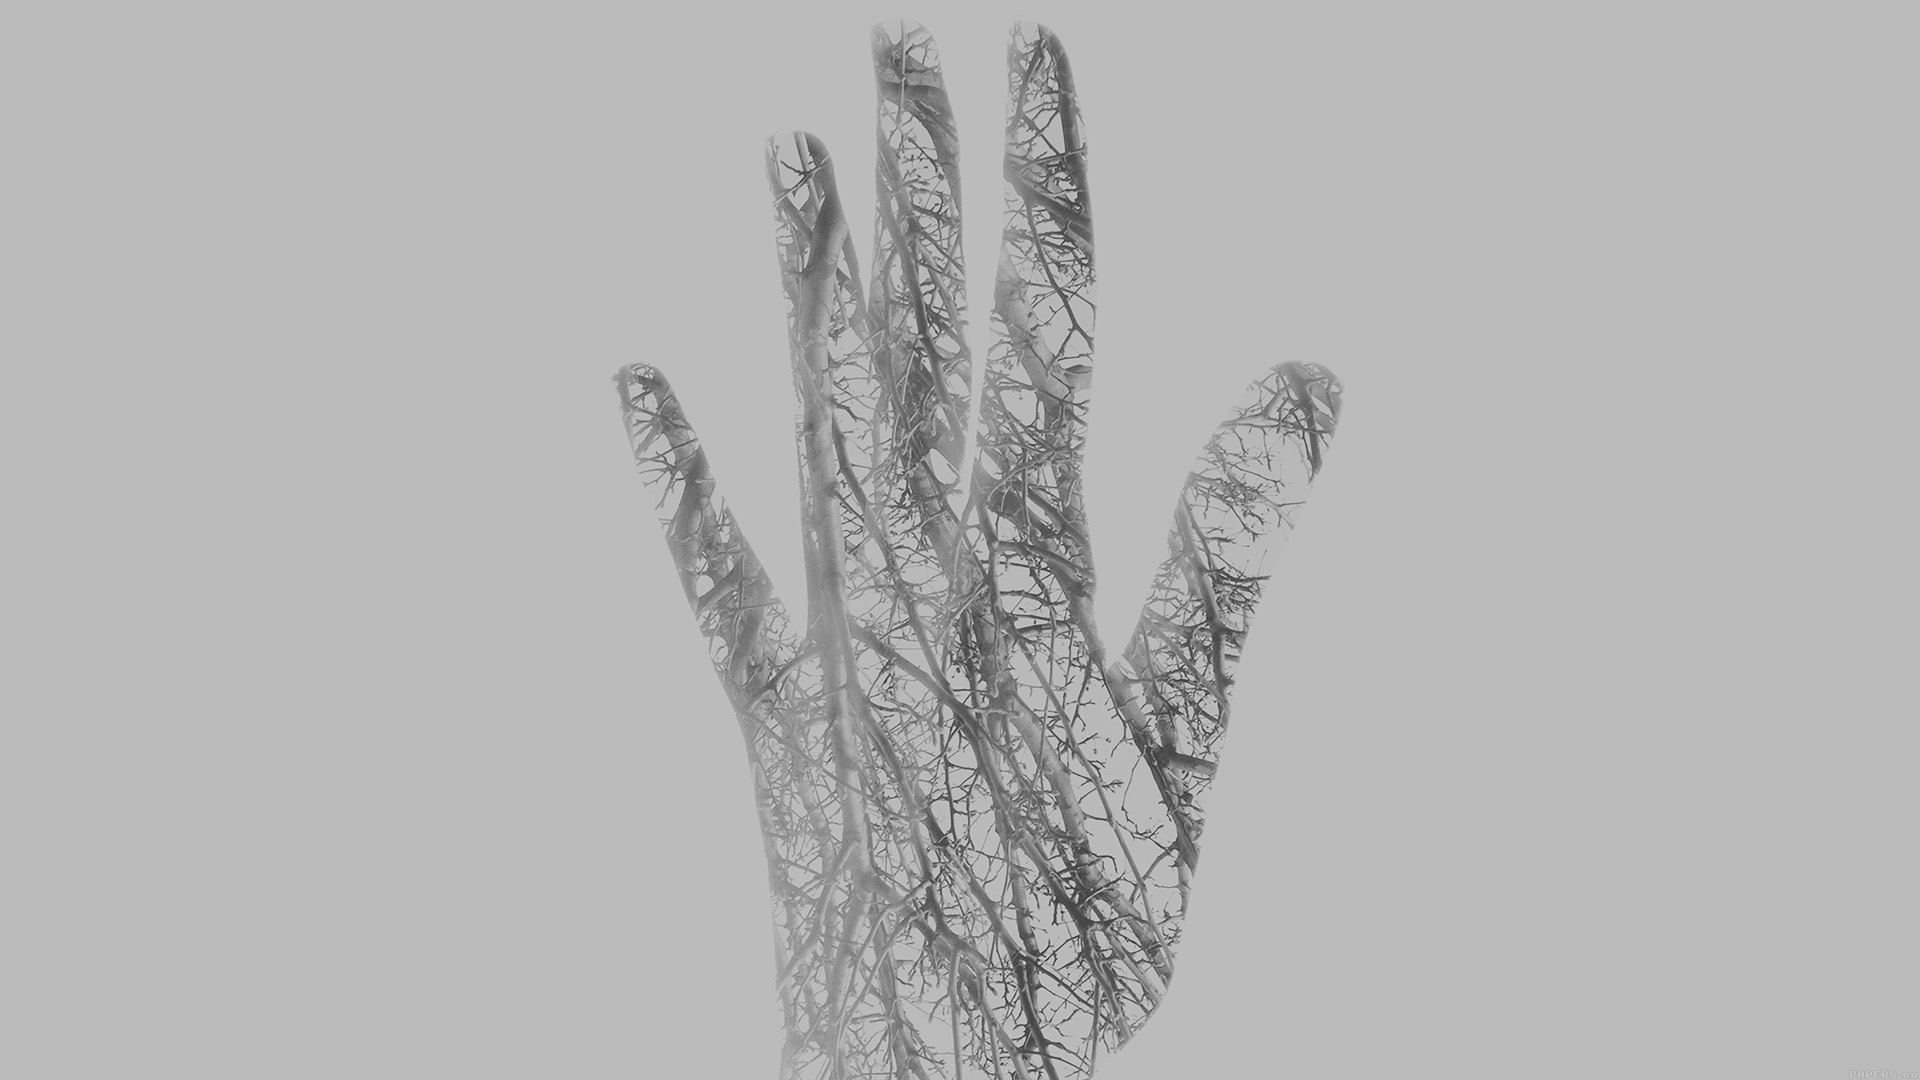 General 1920x1080 digital art hands fingers double exposure trees branch simple background monochrome gray